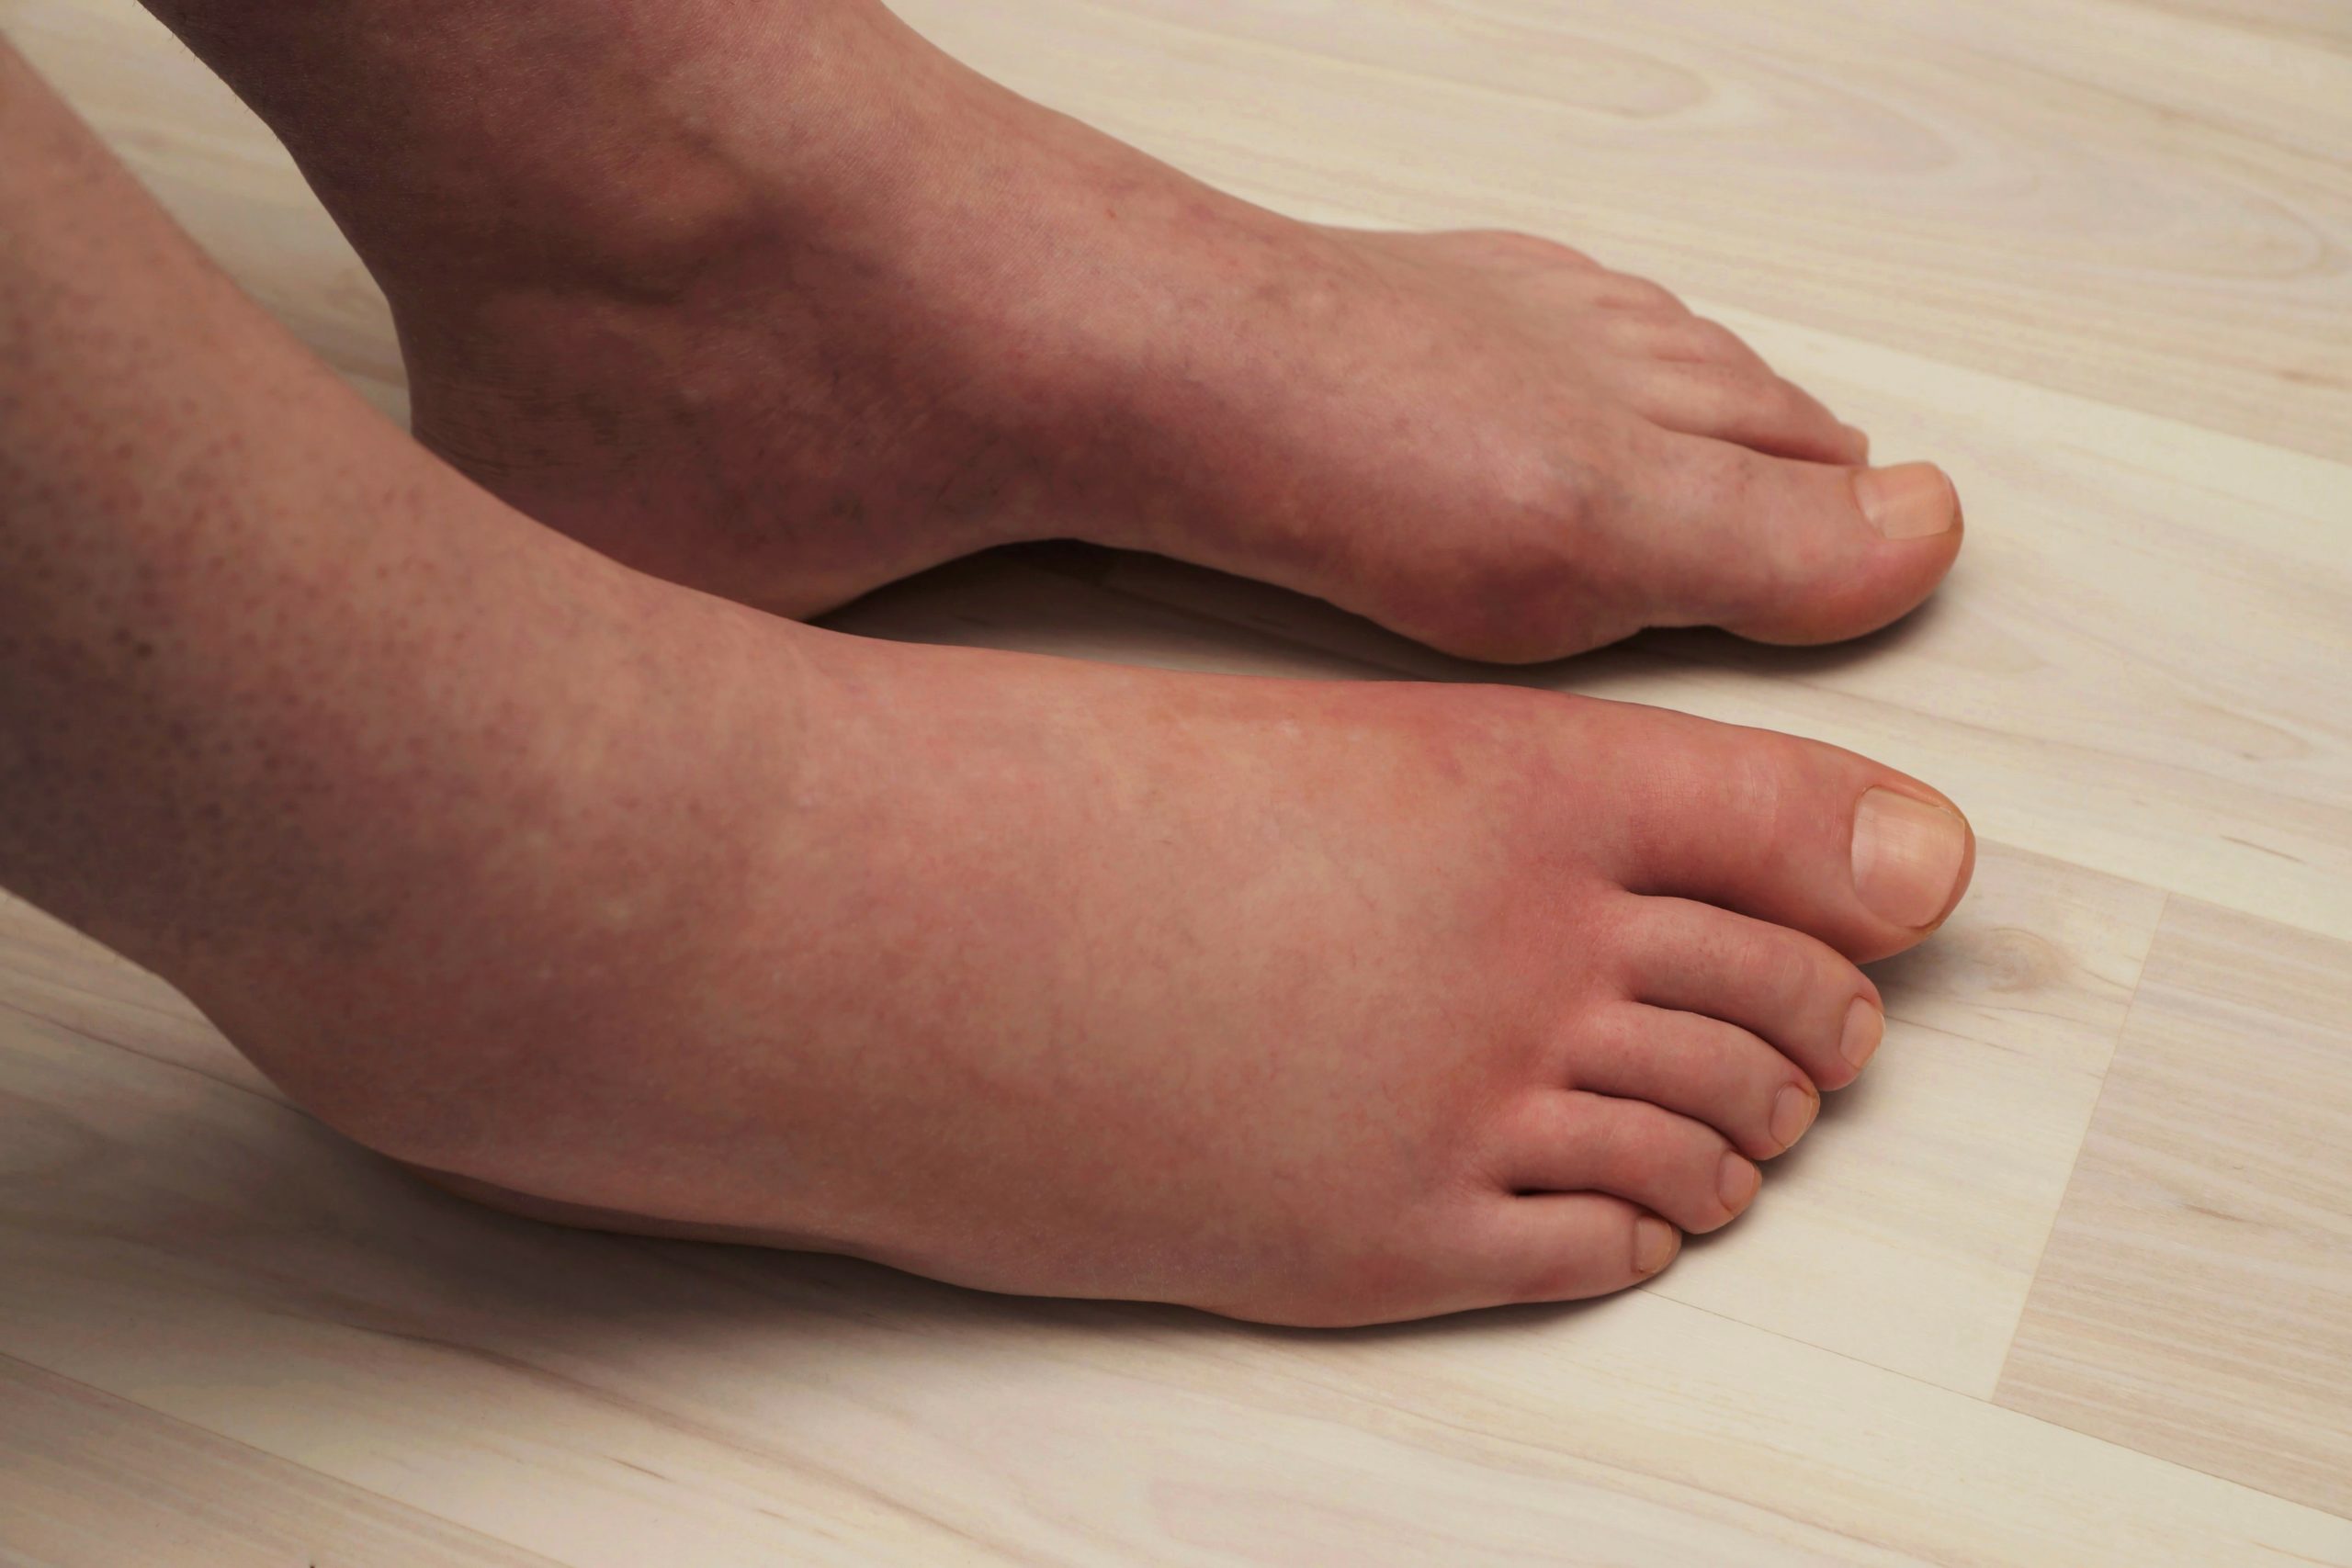 What Causes Swollen Feet And Ankles My Footdr